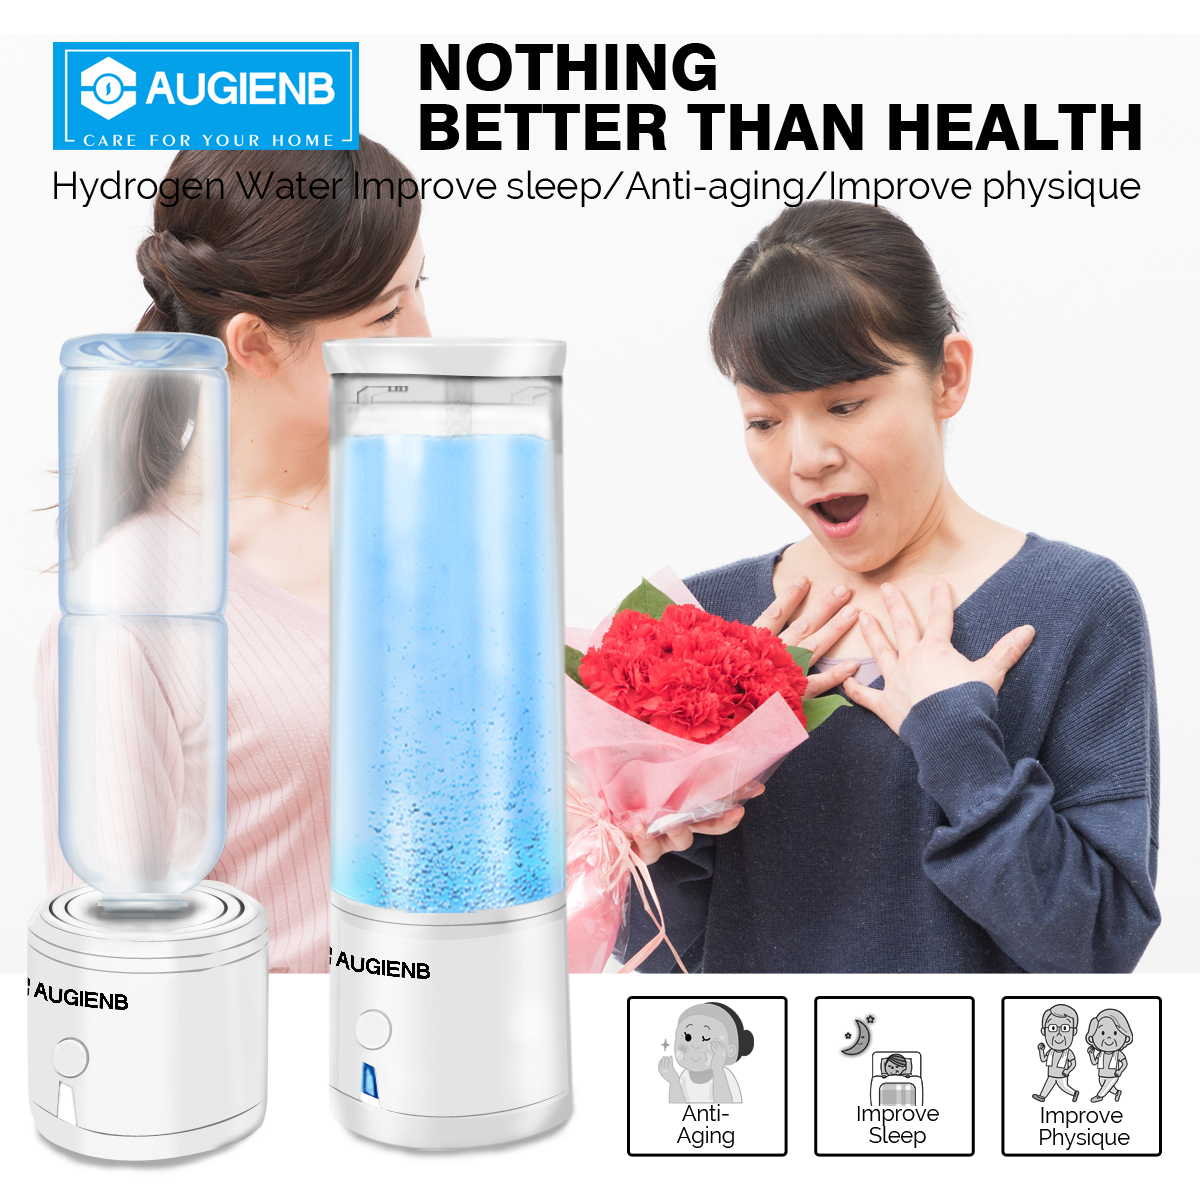 AUGIENB WH02 Portable Smart Hydrogen-Rich Cup Water Generator Ionizer Maker Healthy Alkaline Energy Cup Water Bottle (USB Cable) 5